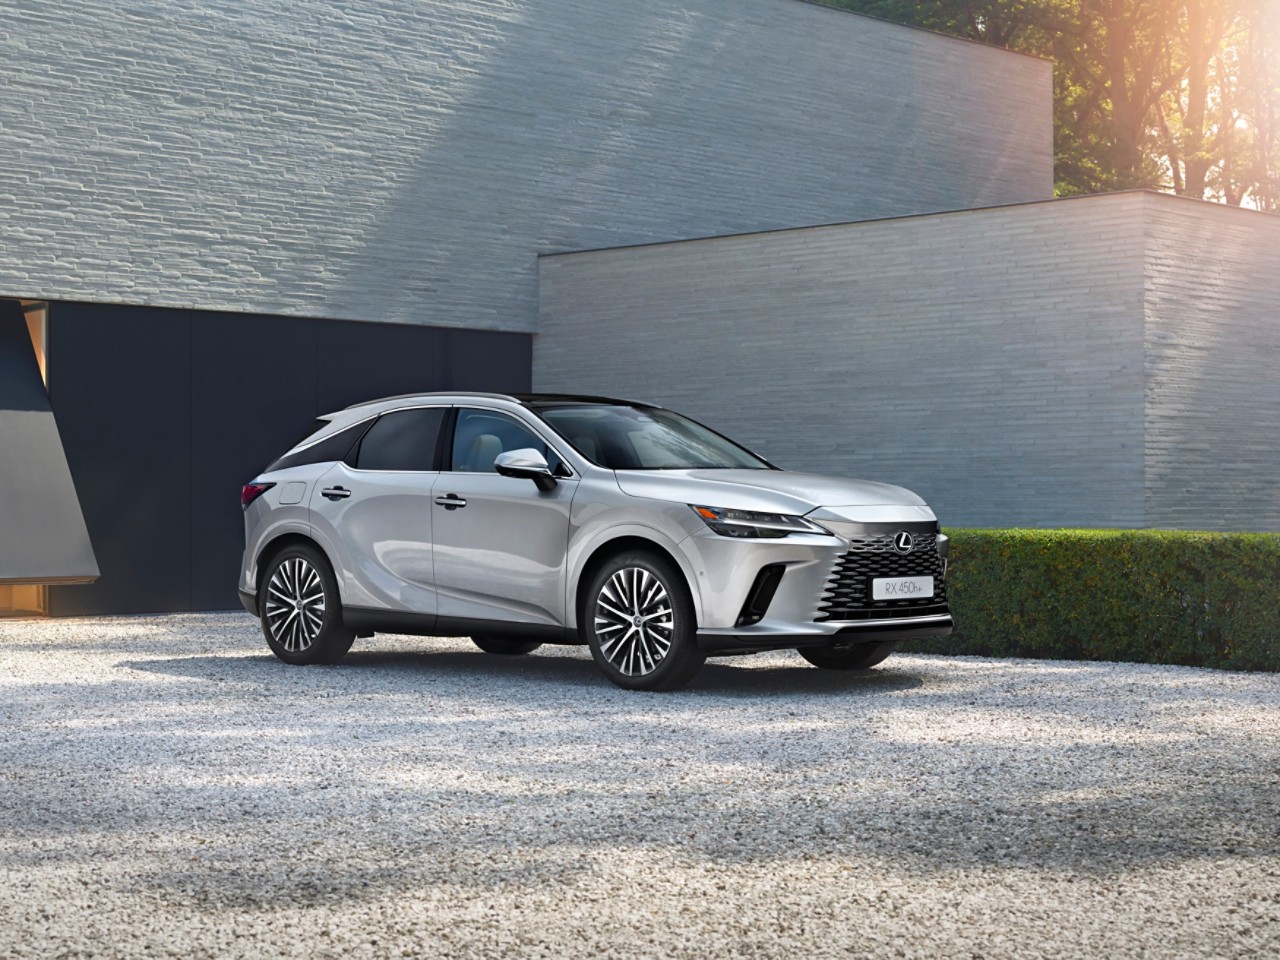 Front view of the Lexus RX 500h driving